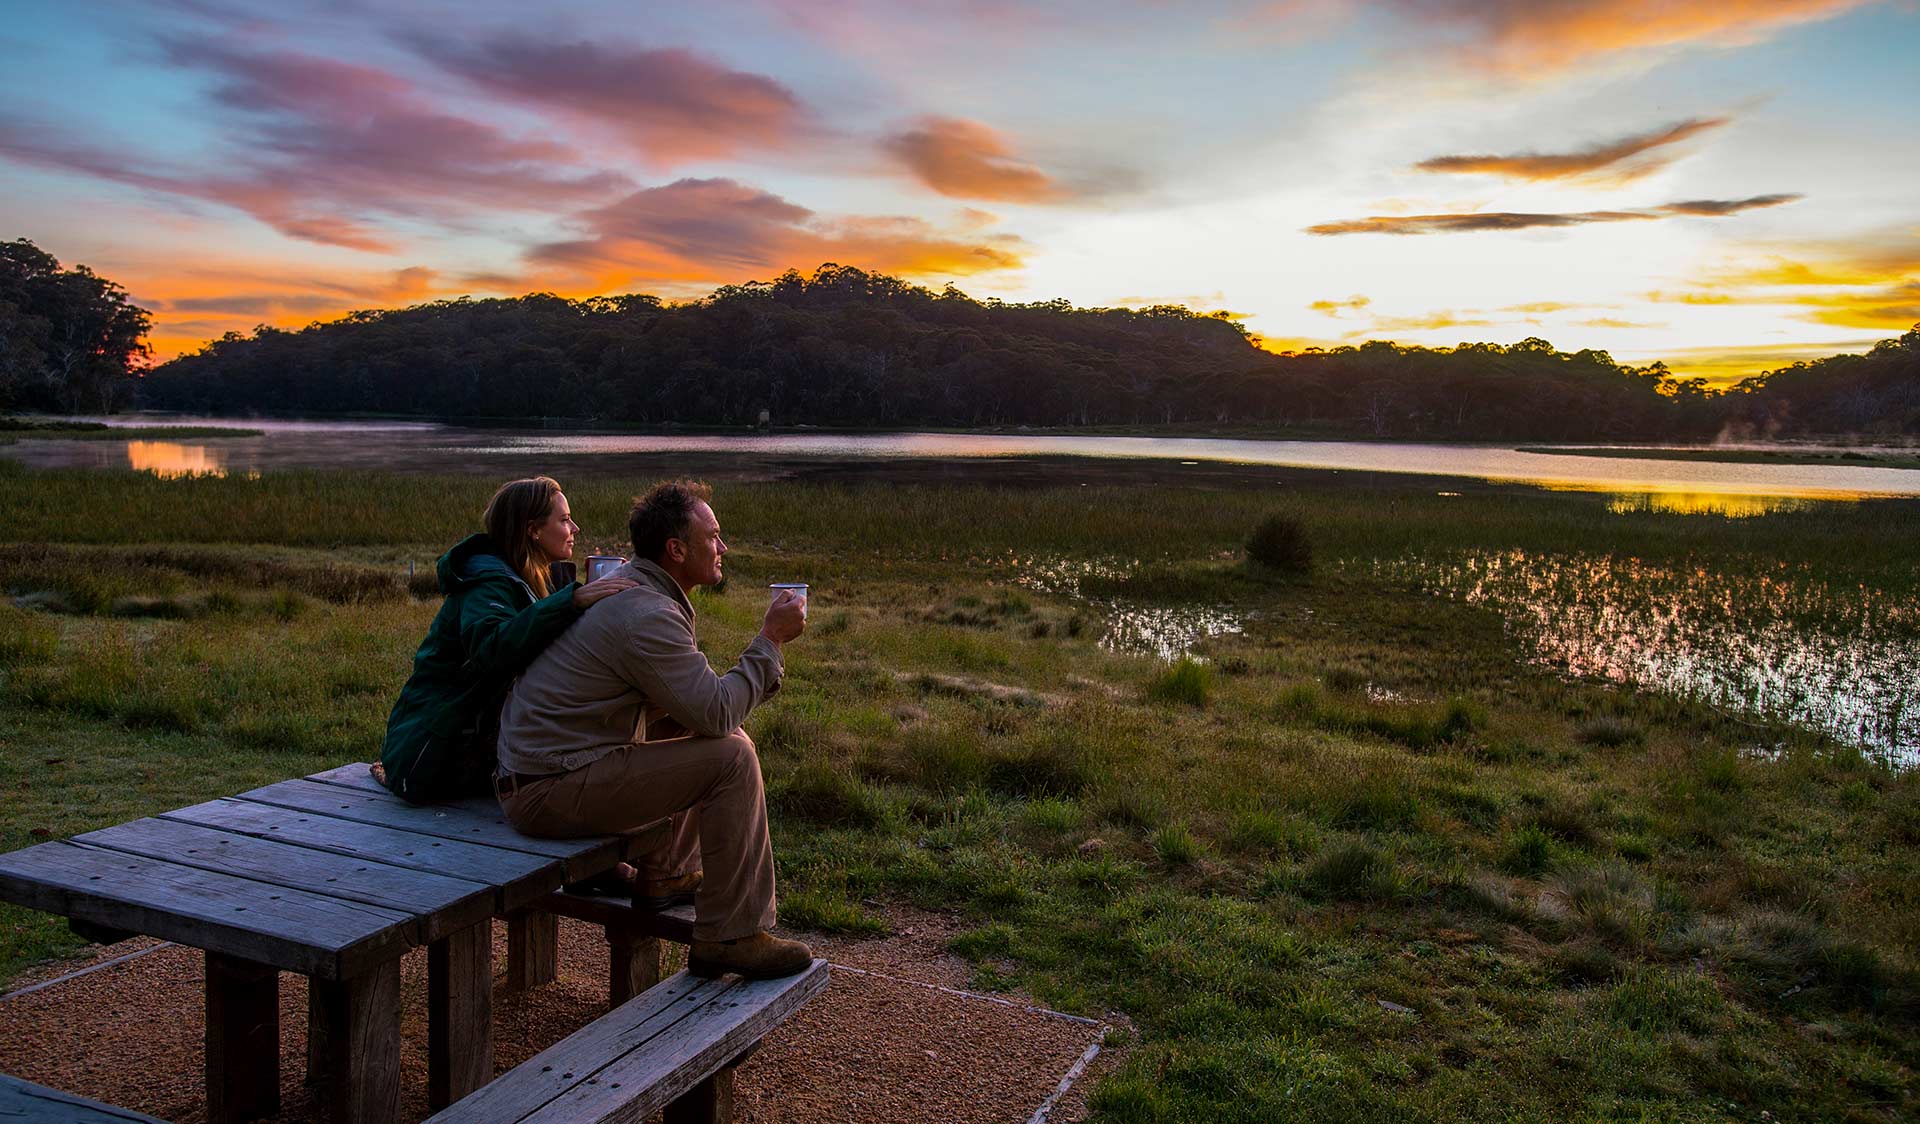 A couple watch the sunset at a picnic table on the edge of Lake Catani at Mount Buffalo National Park.